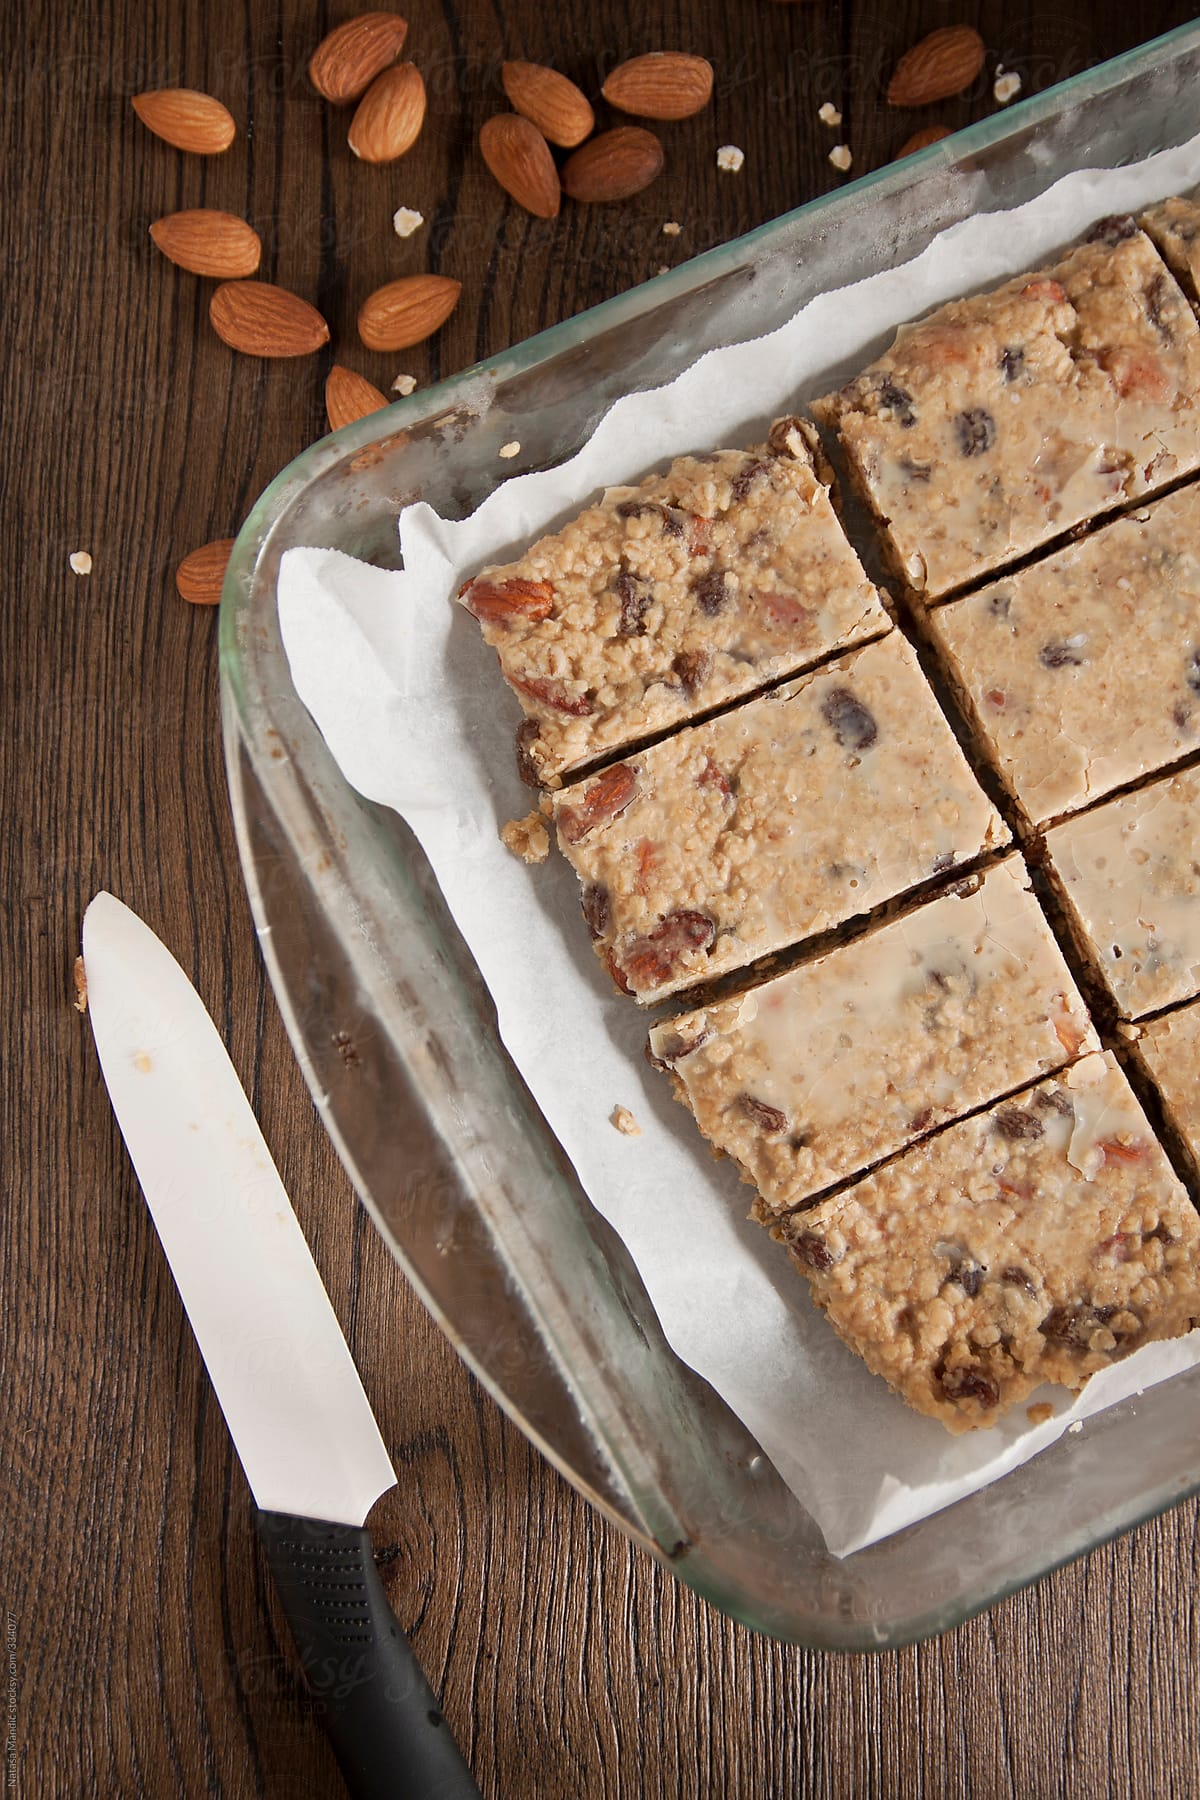 Oatmeal bars with almonds, raisin and peanut butter